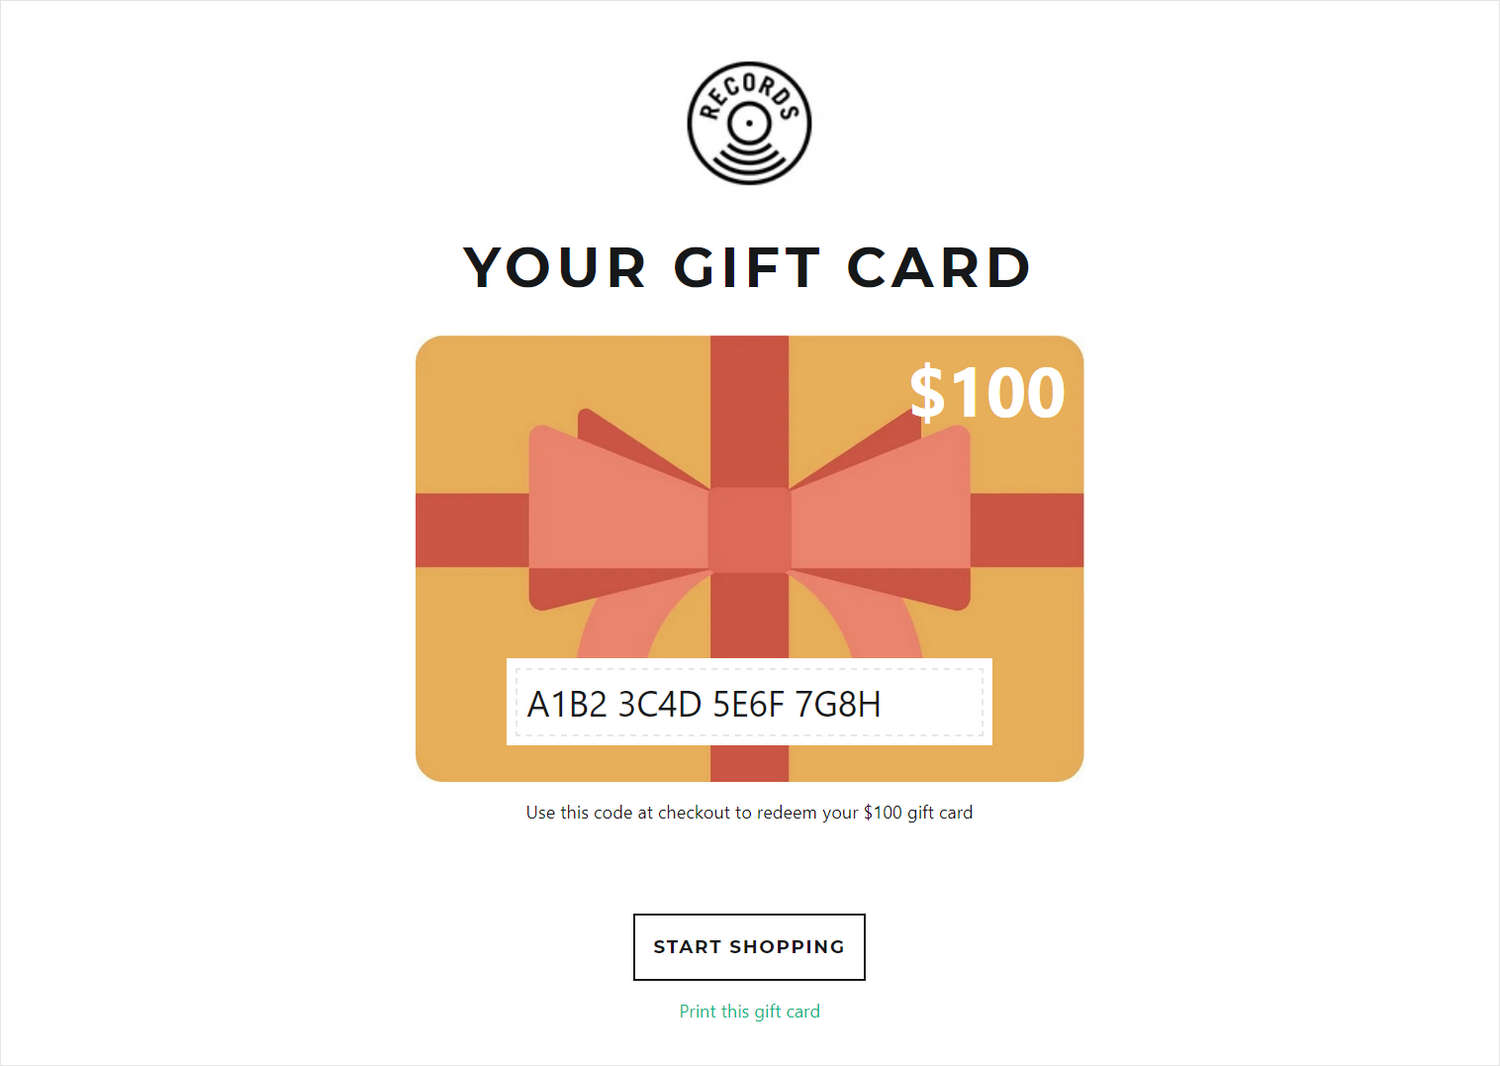 An example Gift card section on a store's gift card page.